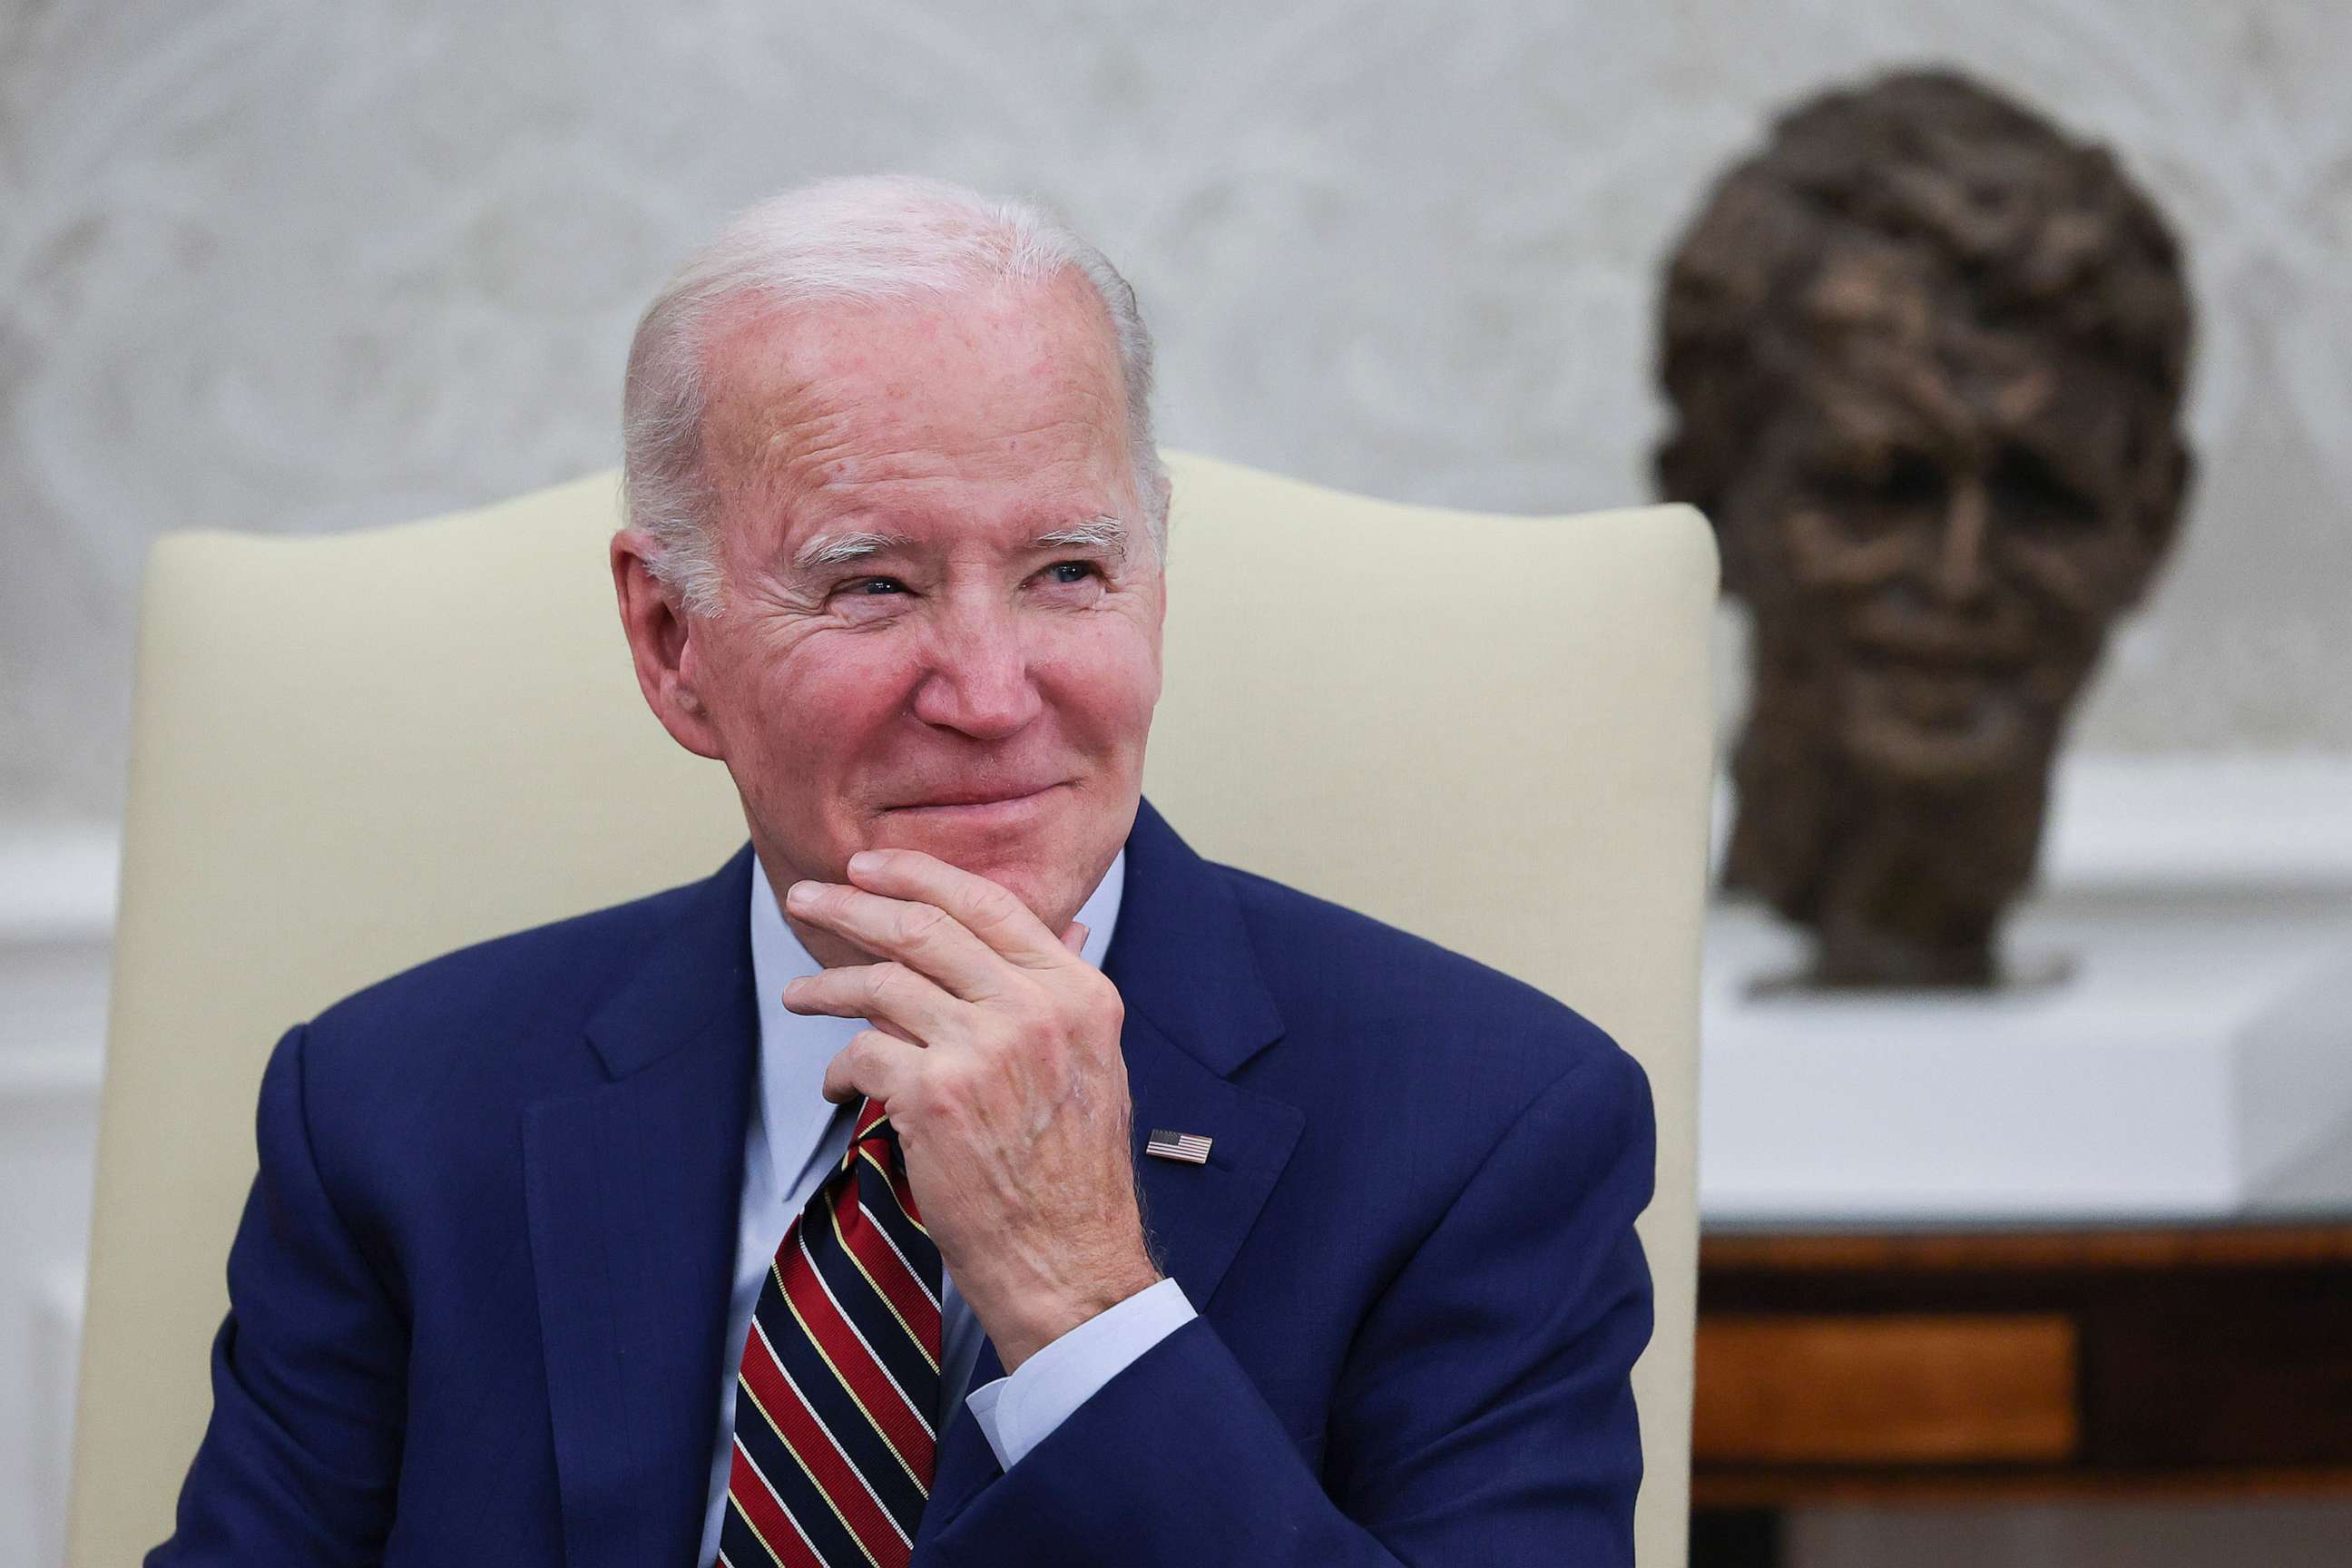 PHOTO: President Joe Biden listens to members of the press shout questions as he meets with Prime Minister Mark Rutte of the Netherlands in the Oval Office of the White House, Jan. 17, 2023 in Washington.